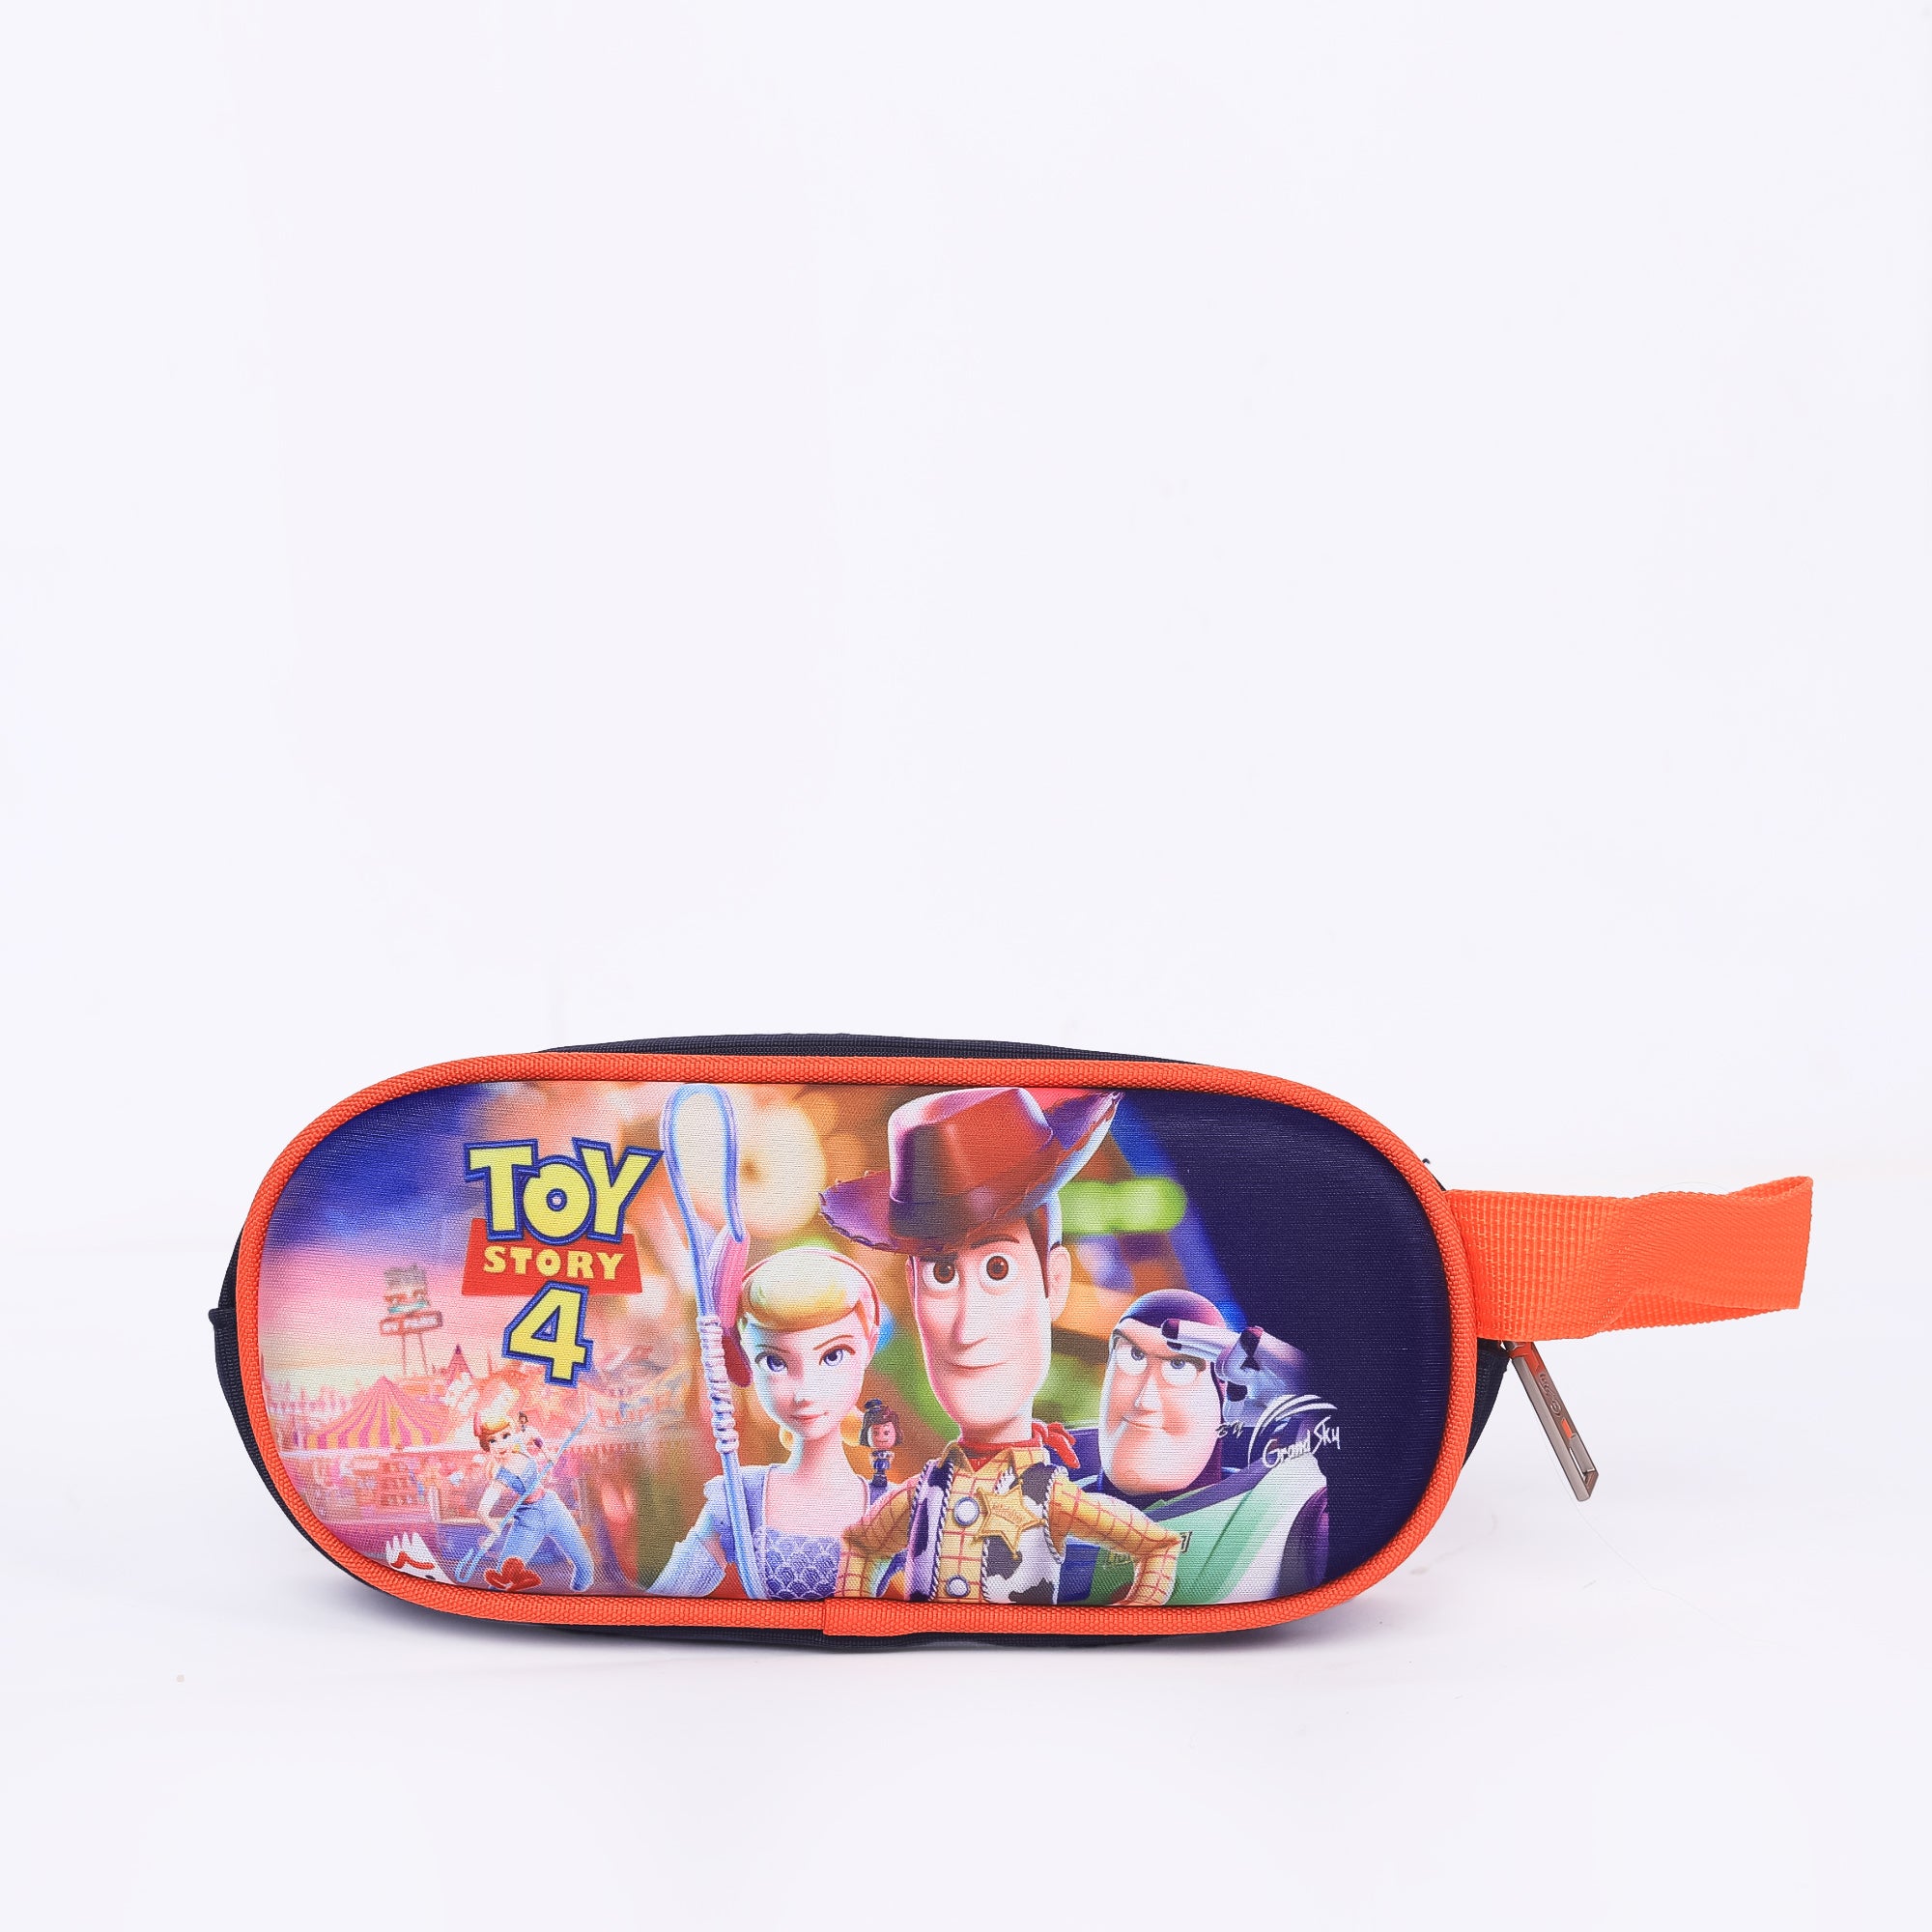 Toy Story 2 Trolly Bag For Kids 16 INCH